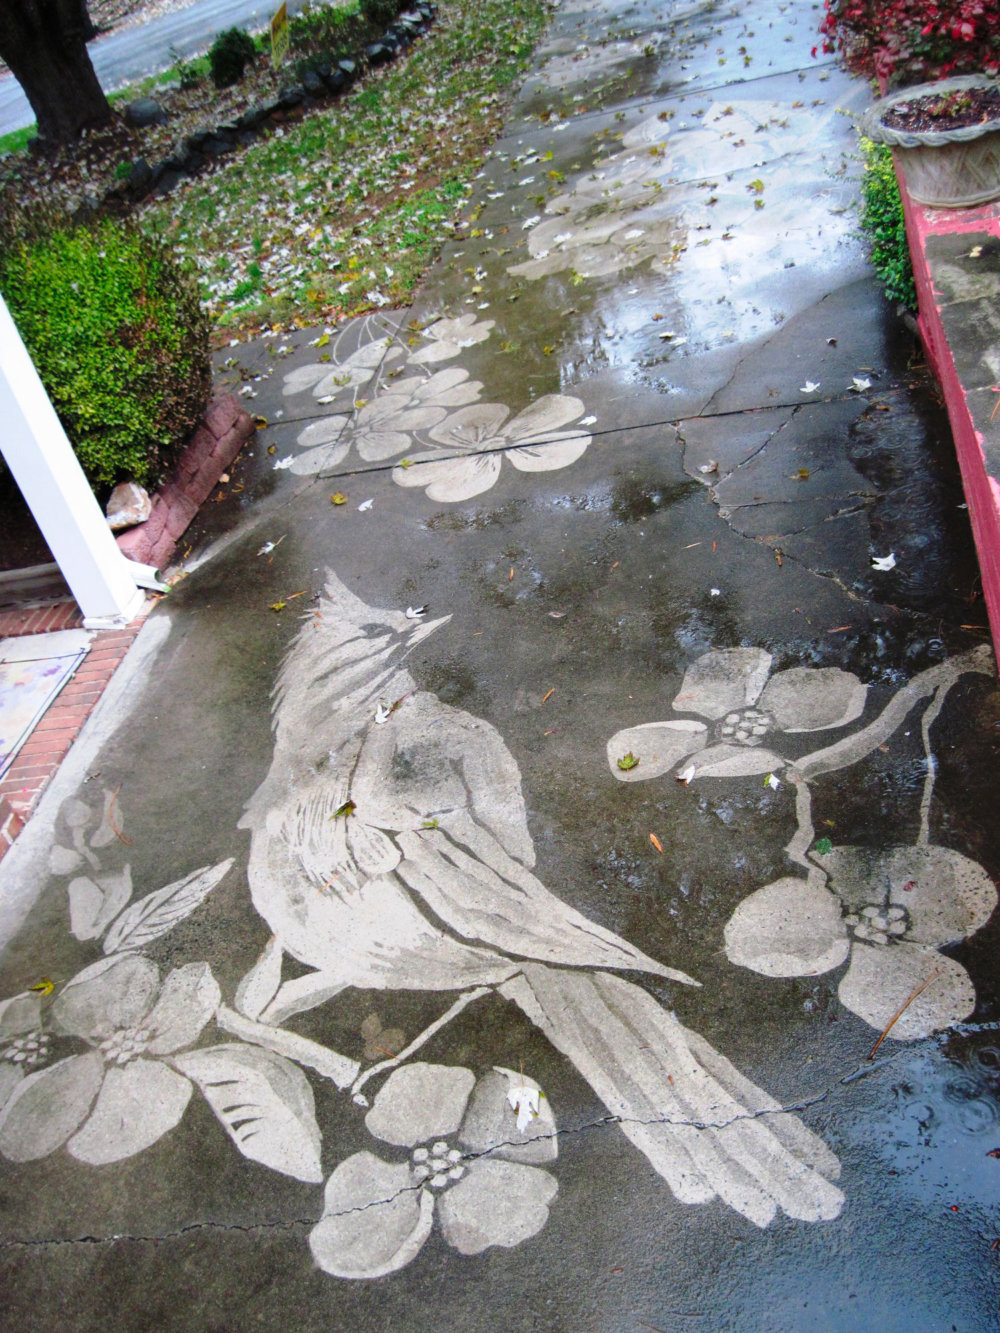 Gorgeous Figures Painted With A Power Washer On Dirty Driveways By Dianna Wood 2